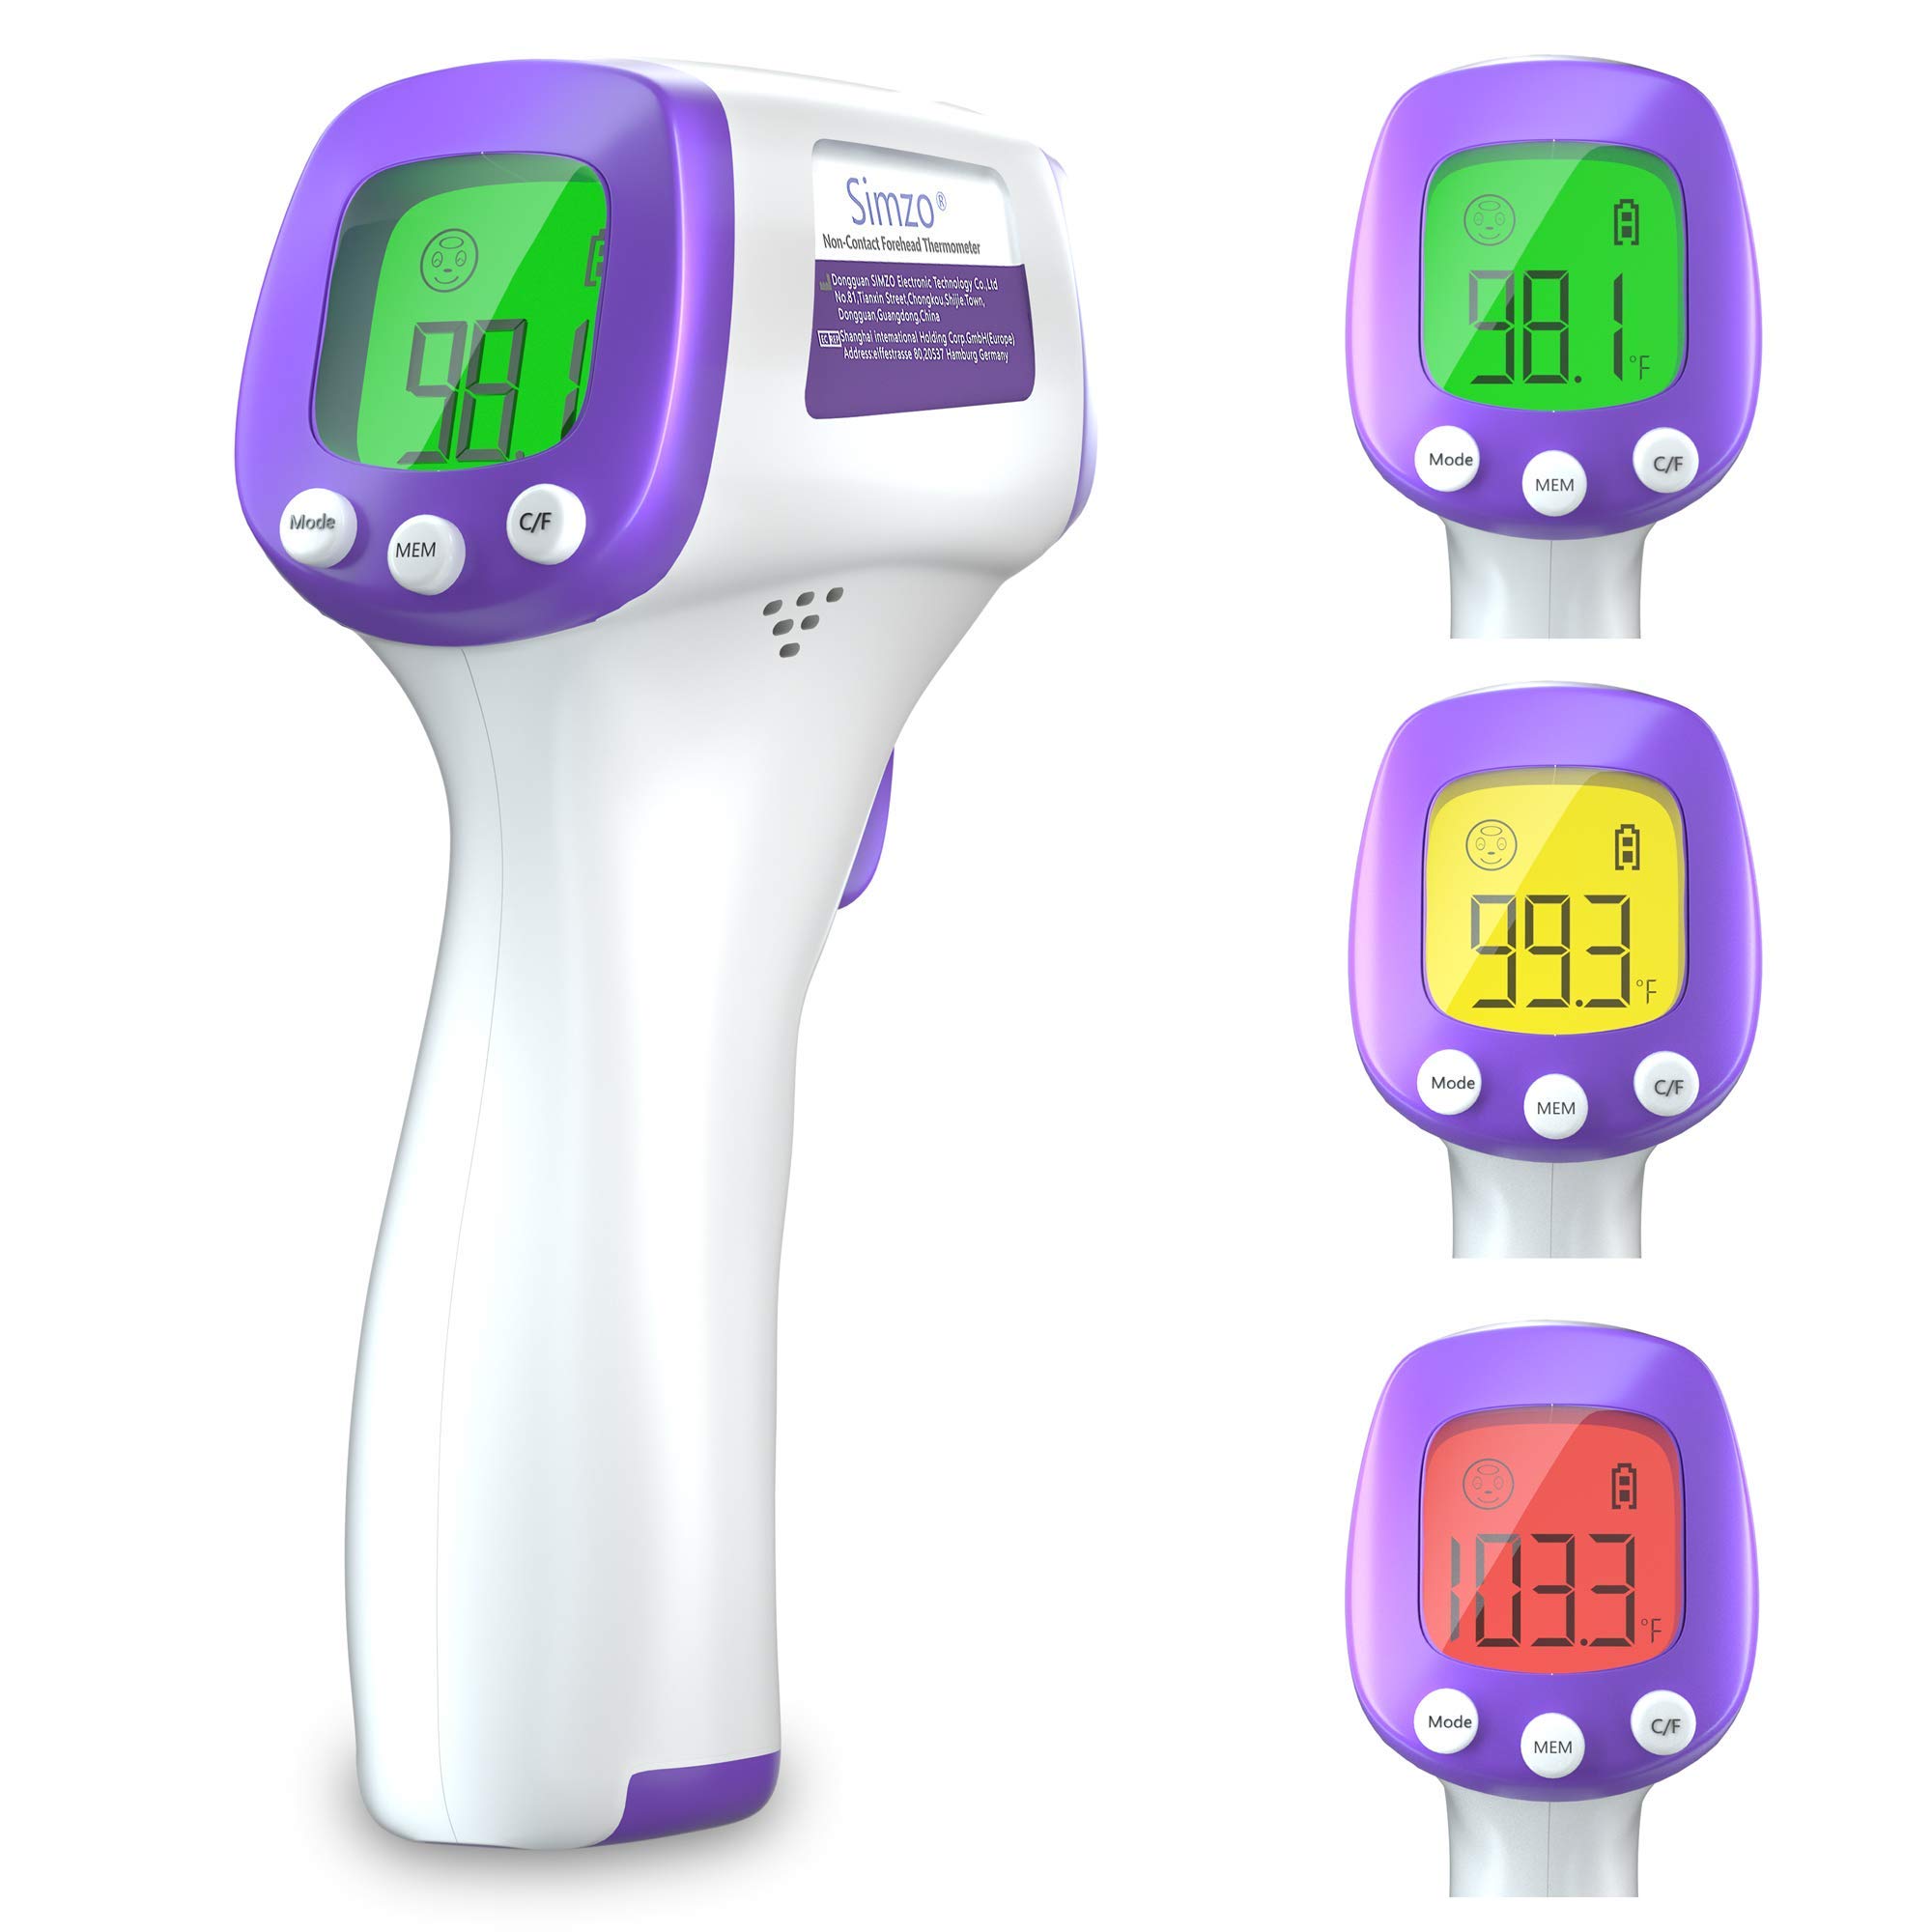 Simzo Forehead Thermometers, Infrared Digital Thermometer for Baby Kids and Adults, Accurate Digital Reading Non-Contact and LCD Colorful Display（Batteries not Include)